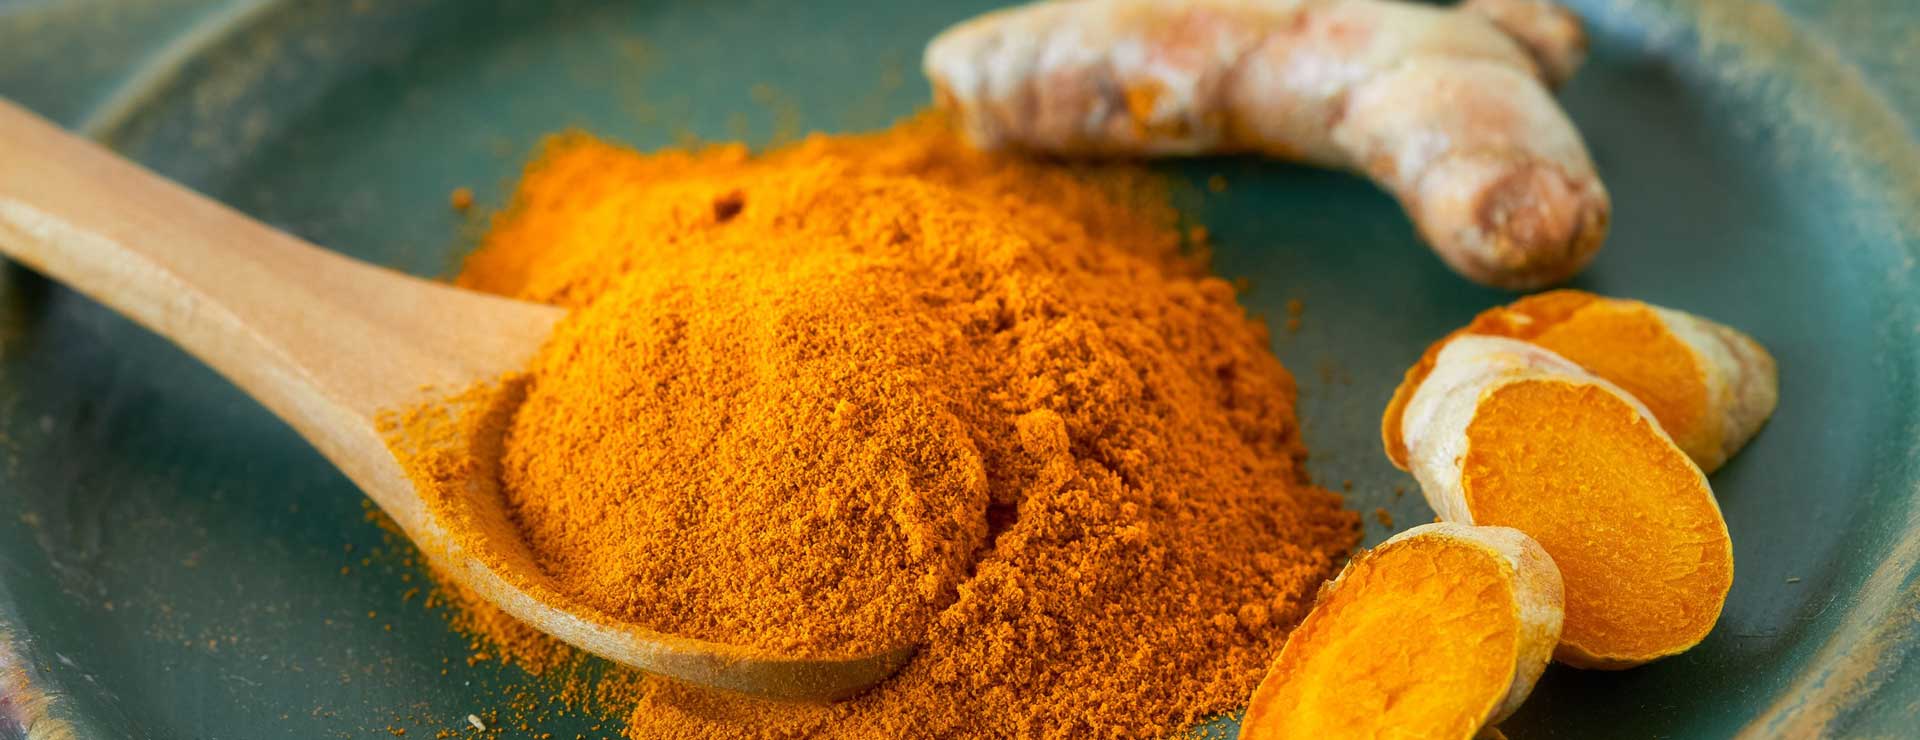 Turmeric, with its active compound curcumin, is a powerful spice that can help fight cancer.